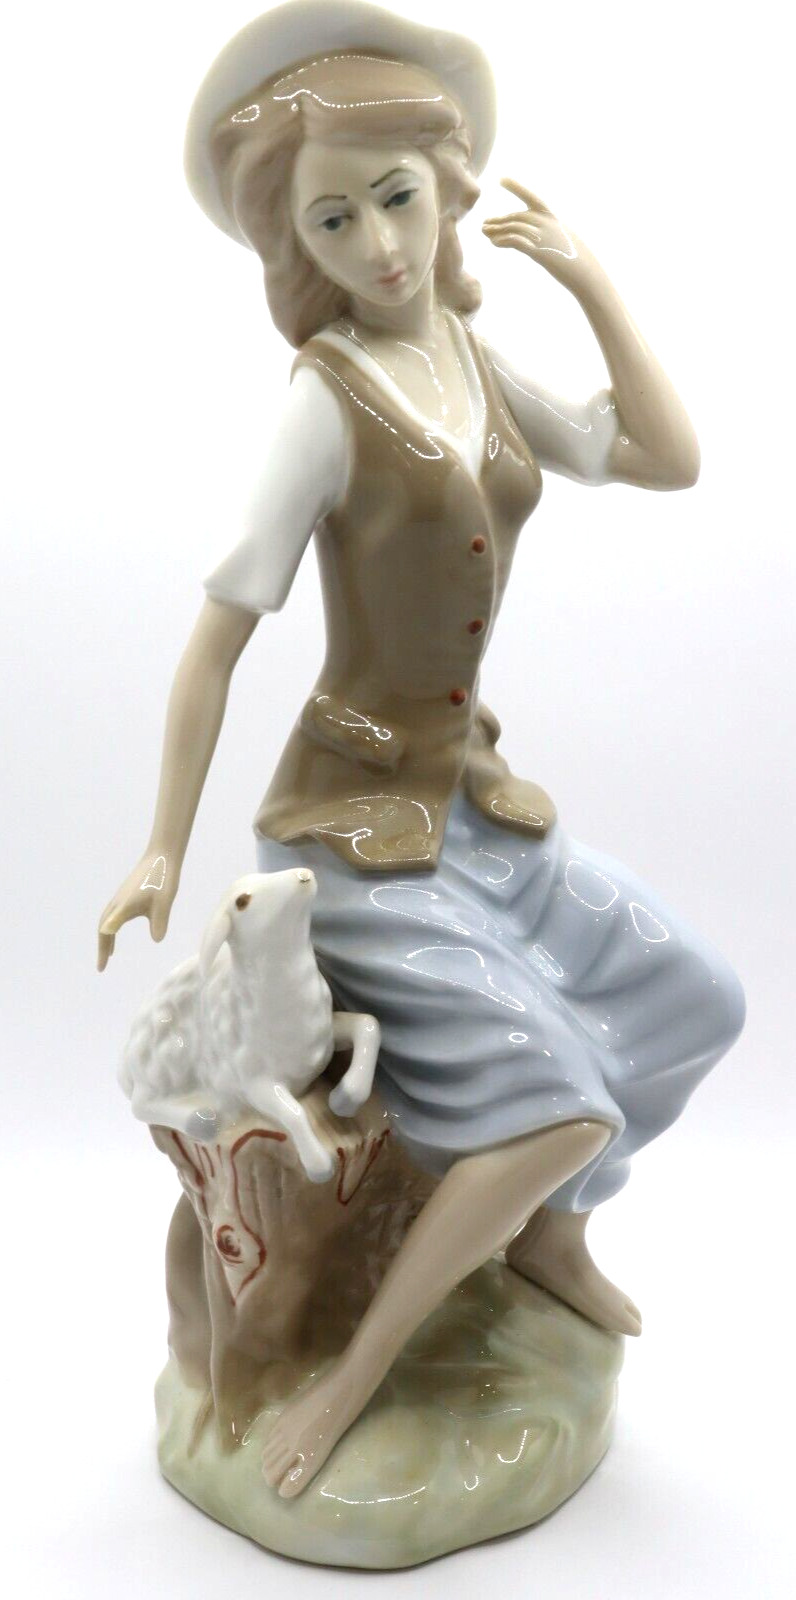 CASADES Porcelain Figurine Girl with Lamb MADE IN SPAIN 11.5 in Missing Finger